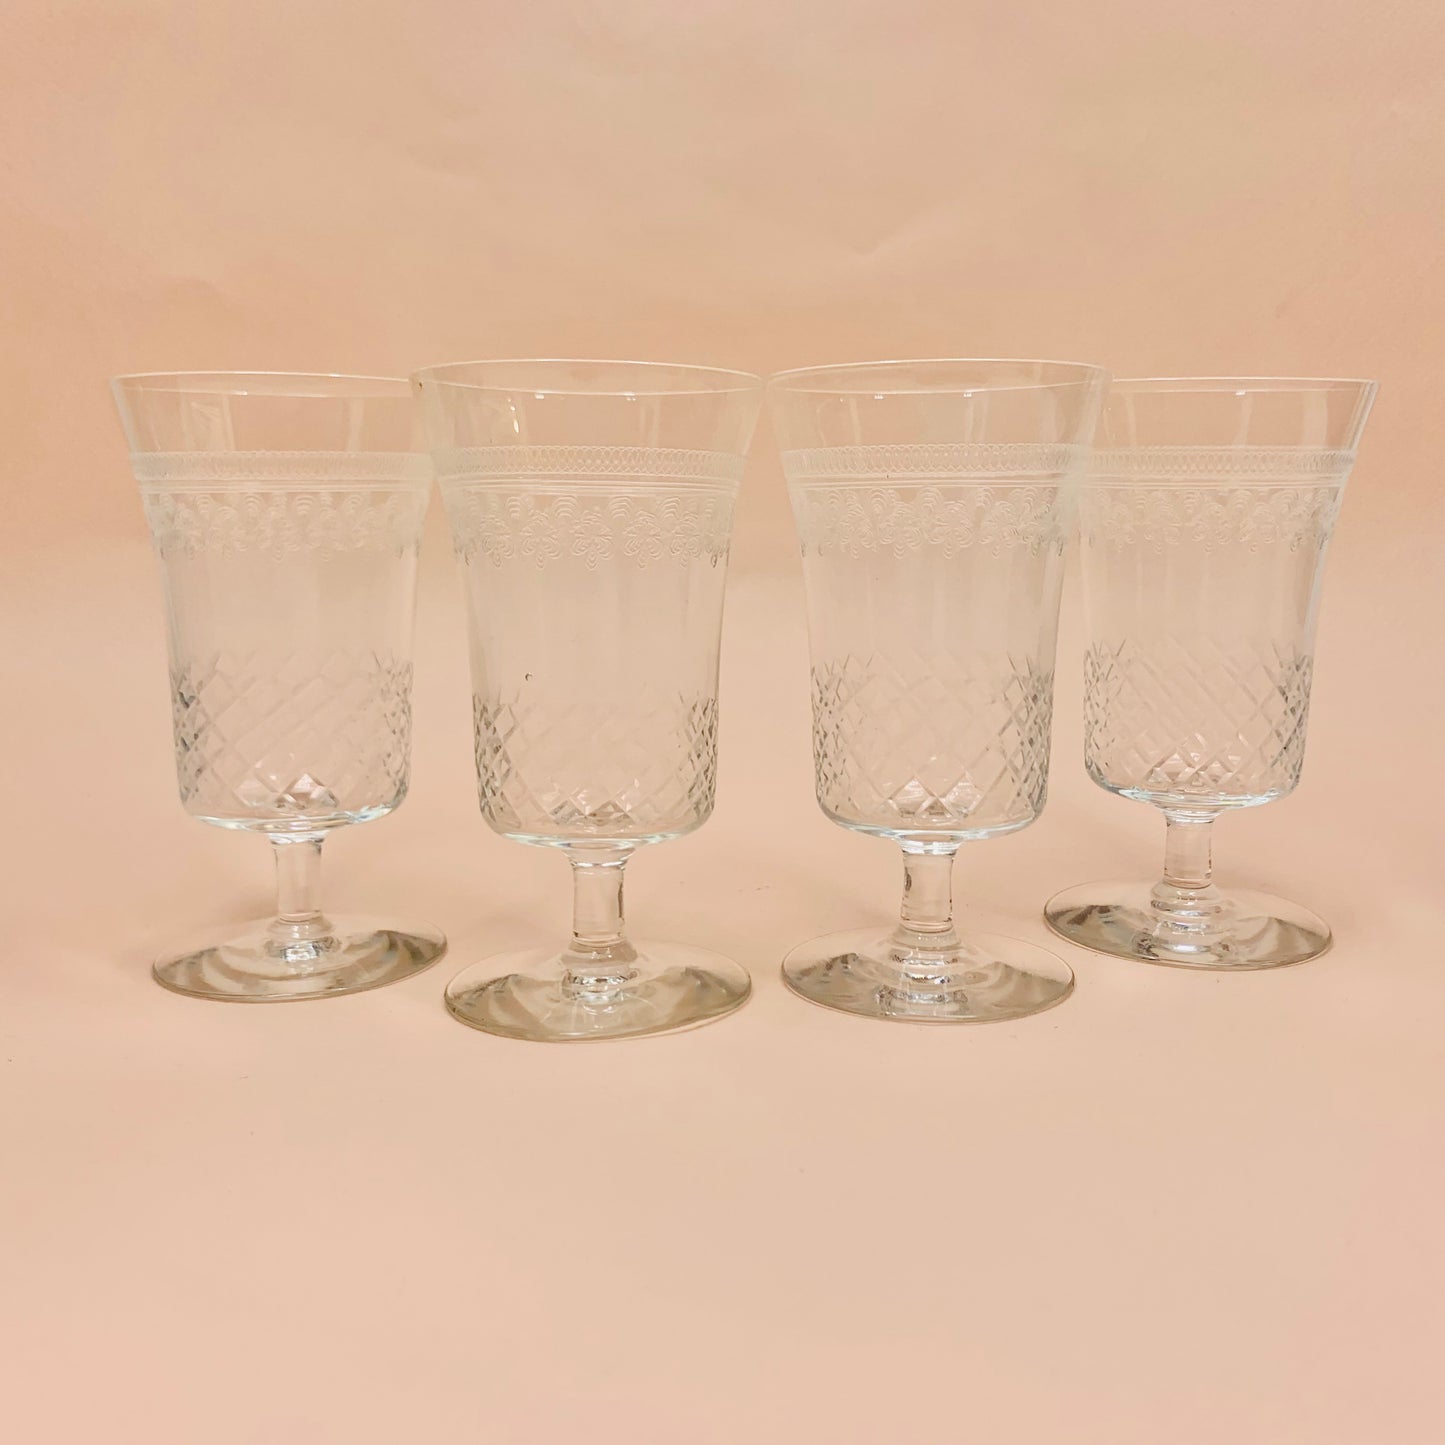 Extremely rare antique hand etched Pall Mall liqueur glasses in the Pall Mall style